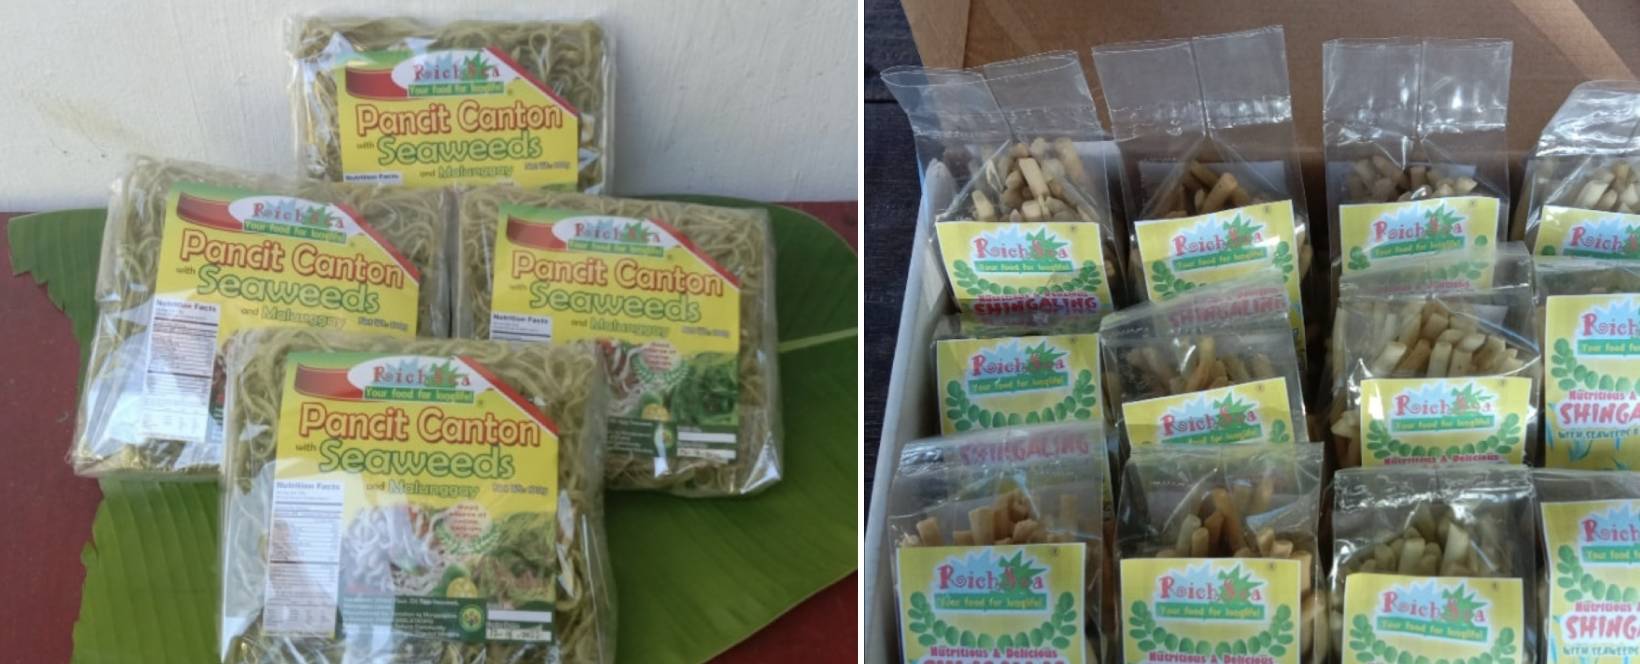 8 Things To Do In Bulalacao - Seaweed-based products